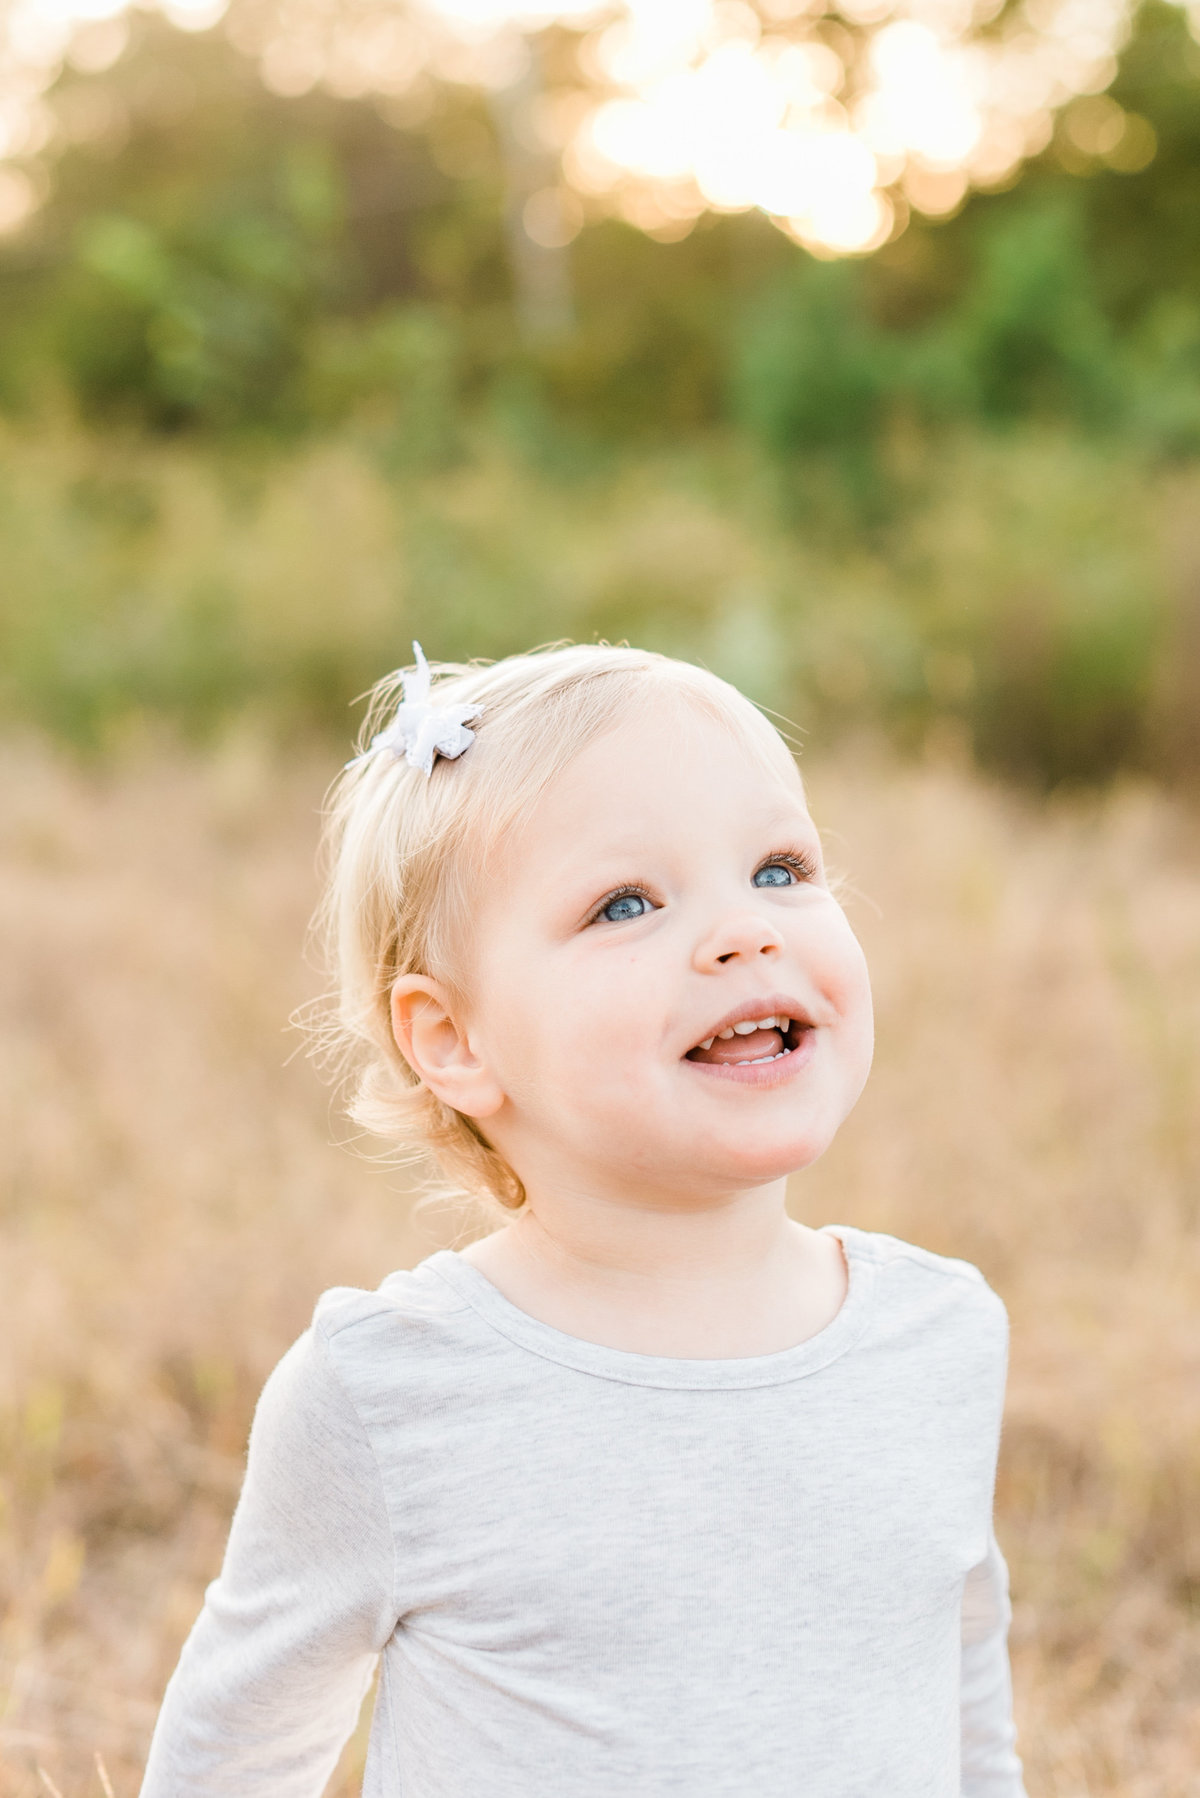 Toddler with blue eyes and a white dress smiles for a portrait during a maternity session in Raleigh. Photographed by Raleigh Maternity Photographer A.J. Dunlap Photography.